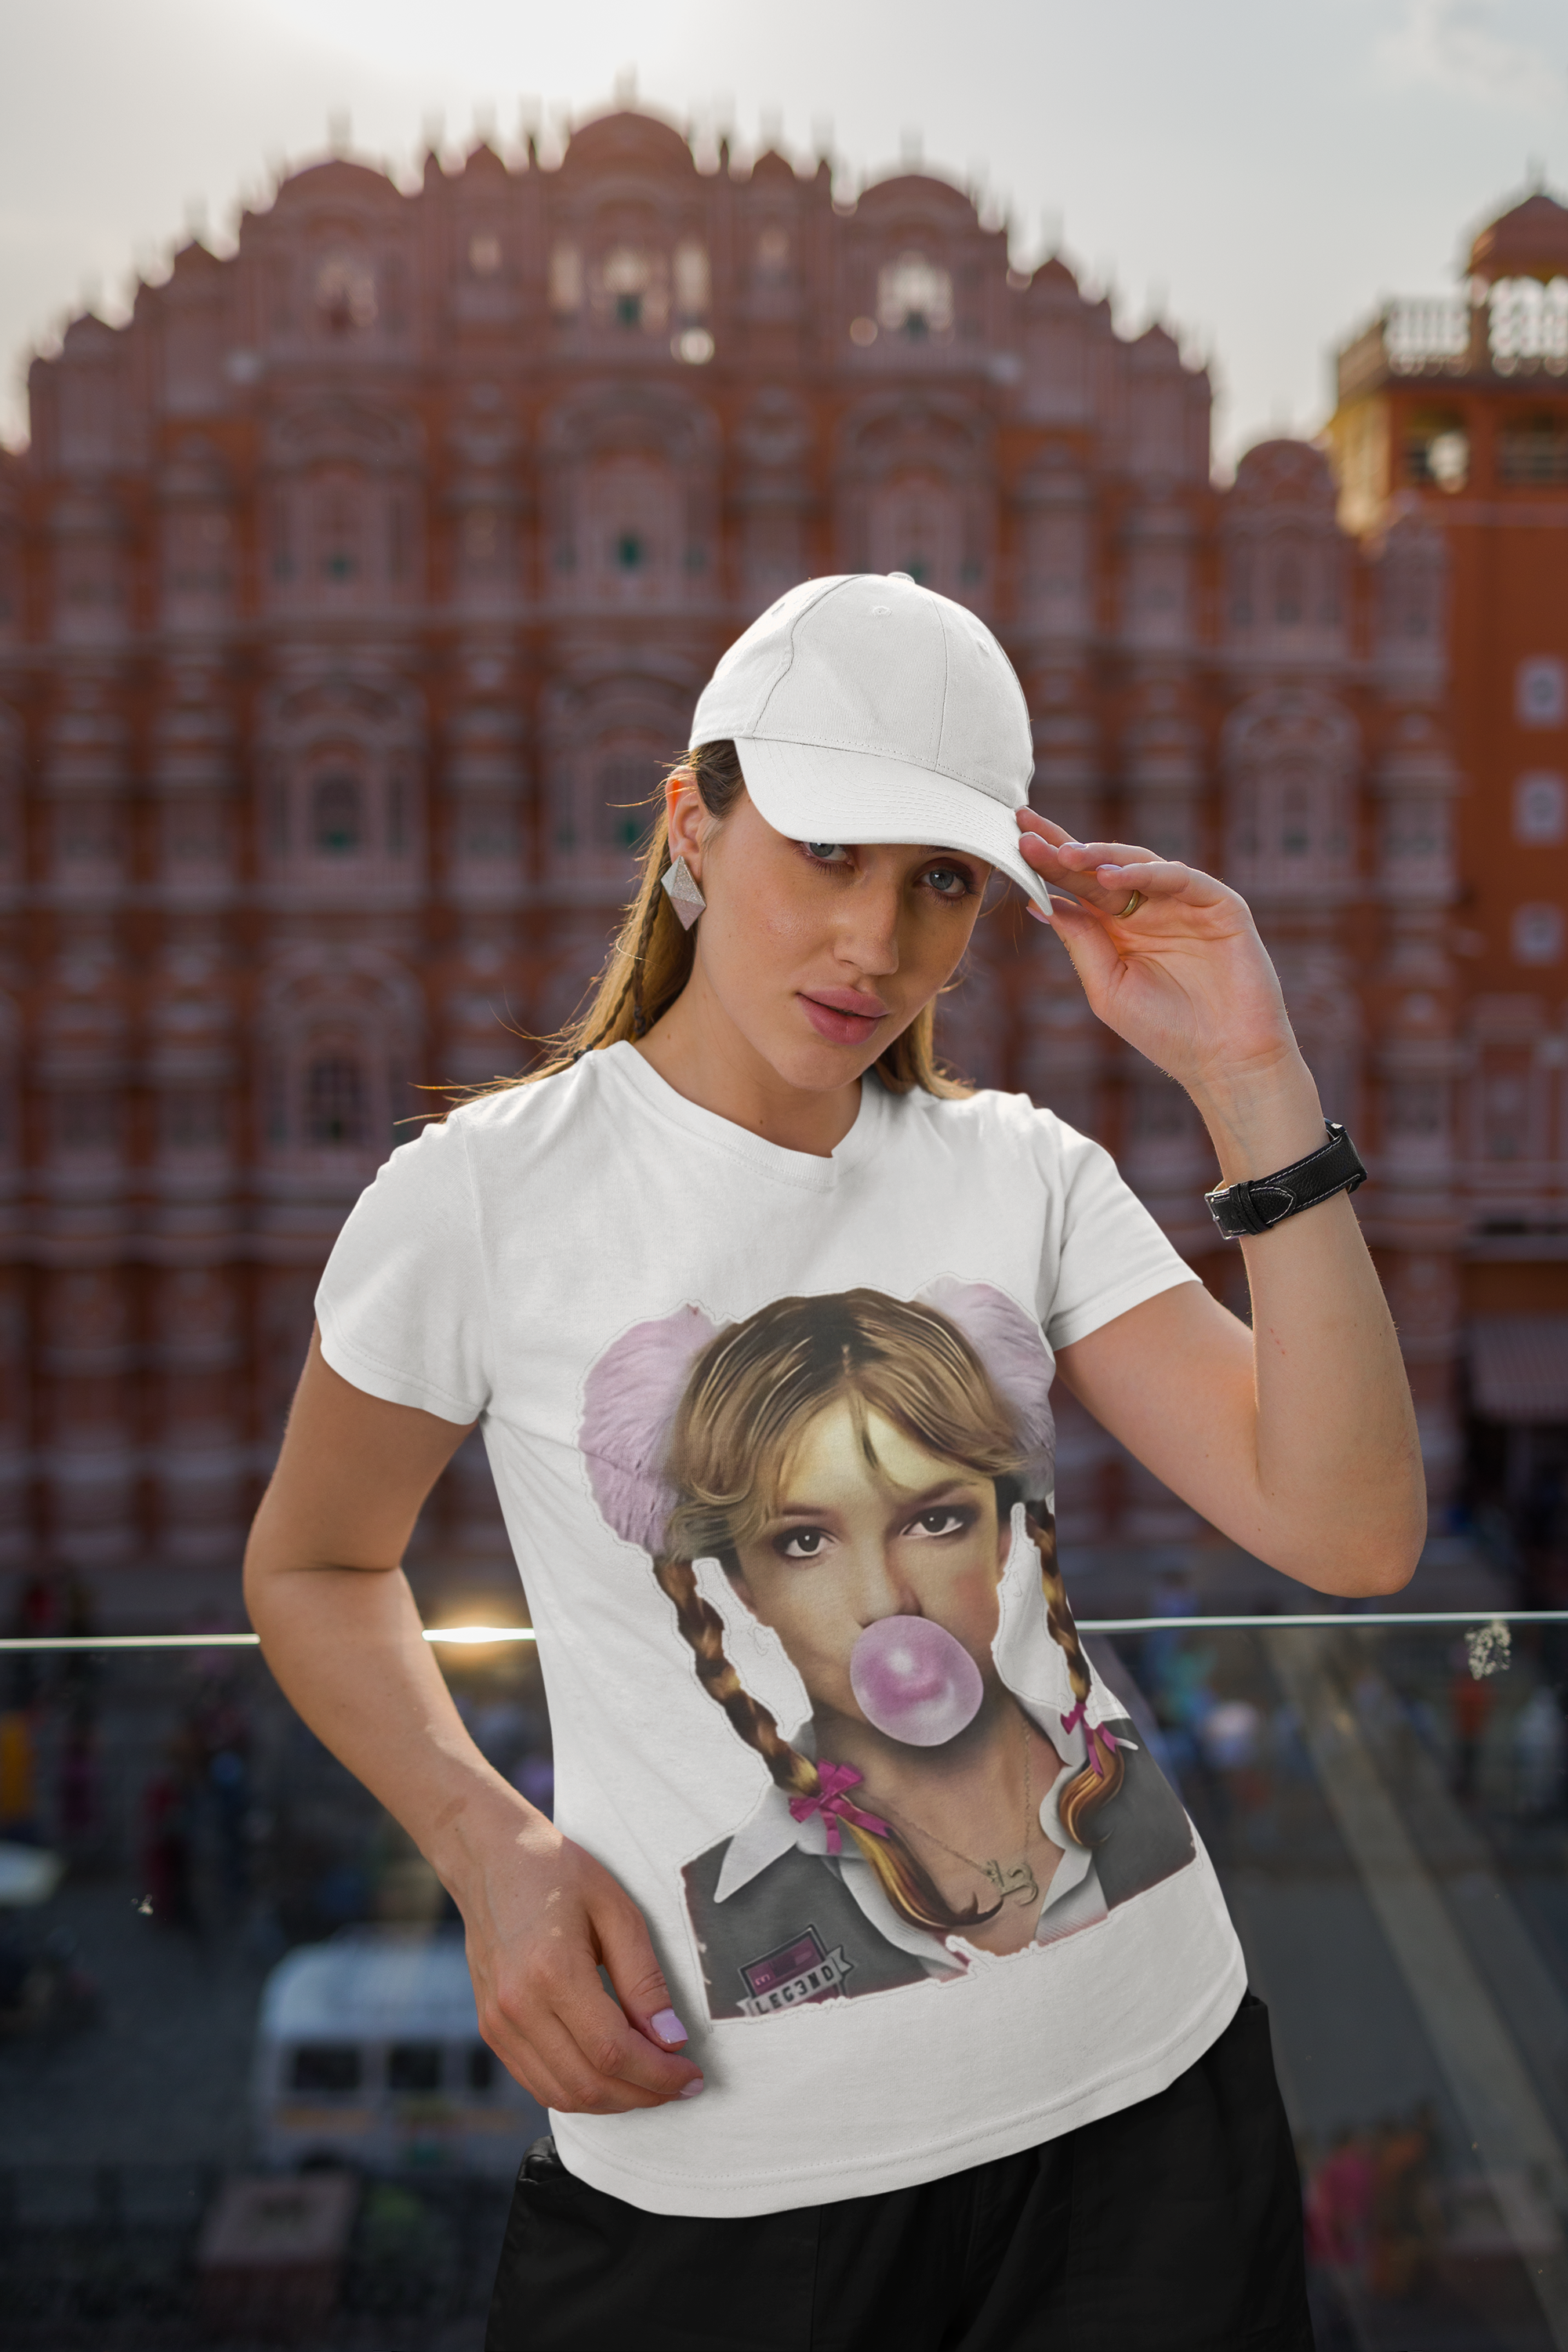 gildan-round-neck-t-shirt-and-dad-hat-mockup-of-a-woman-posing-against-a-balcony-m34695